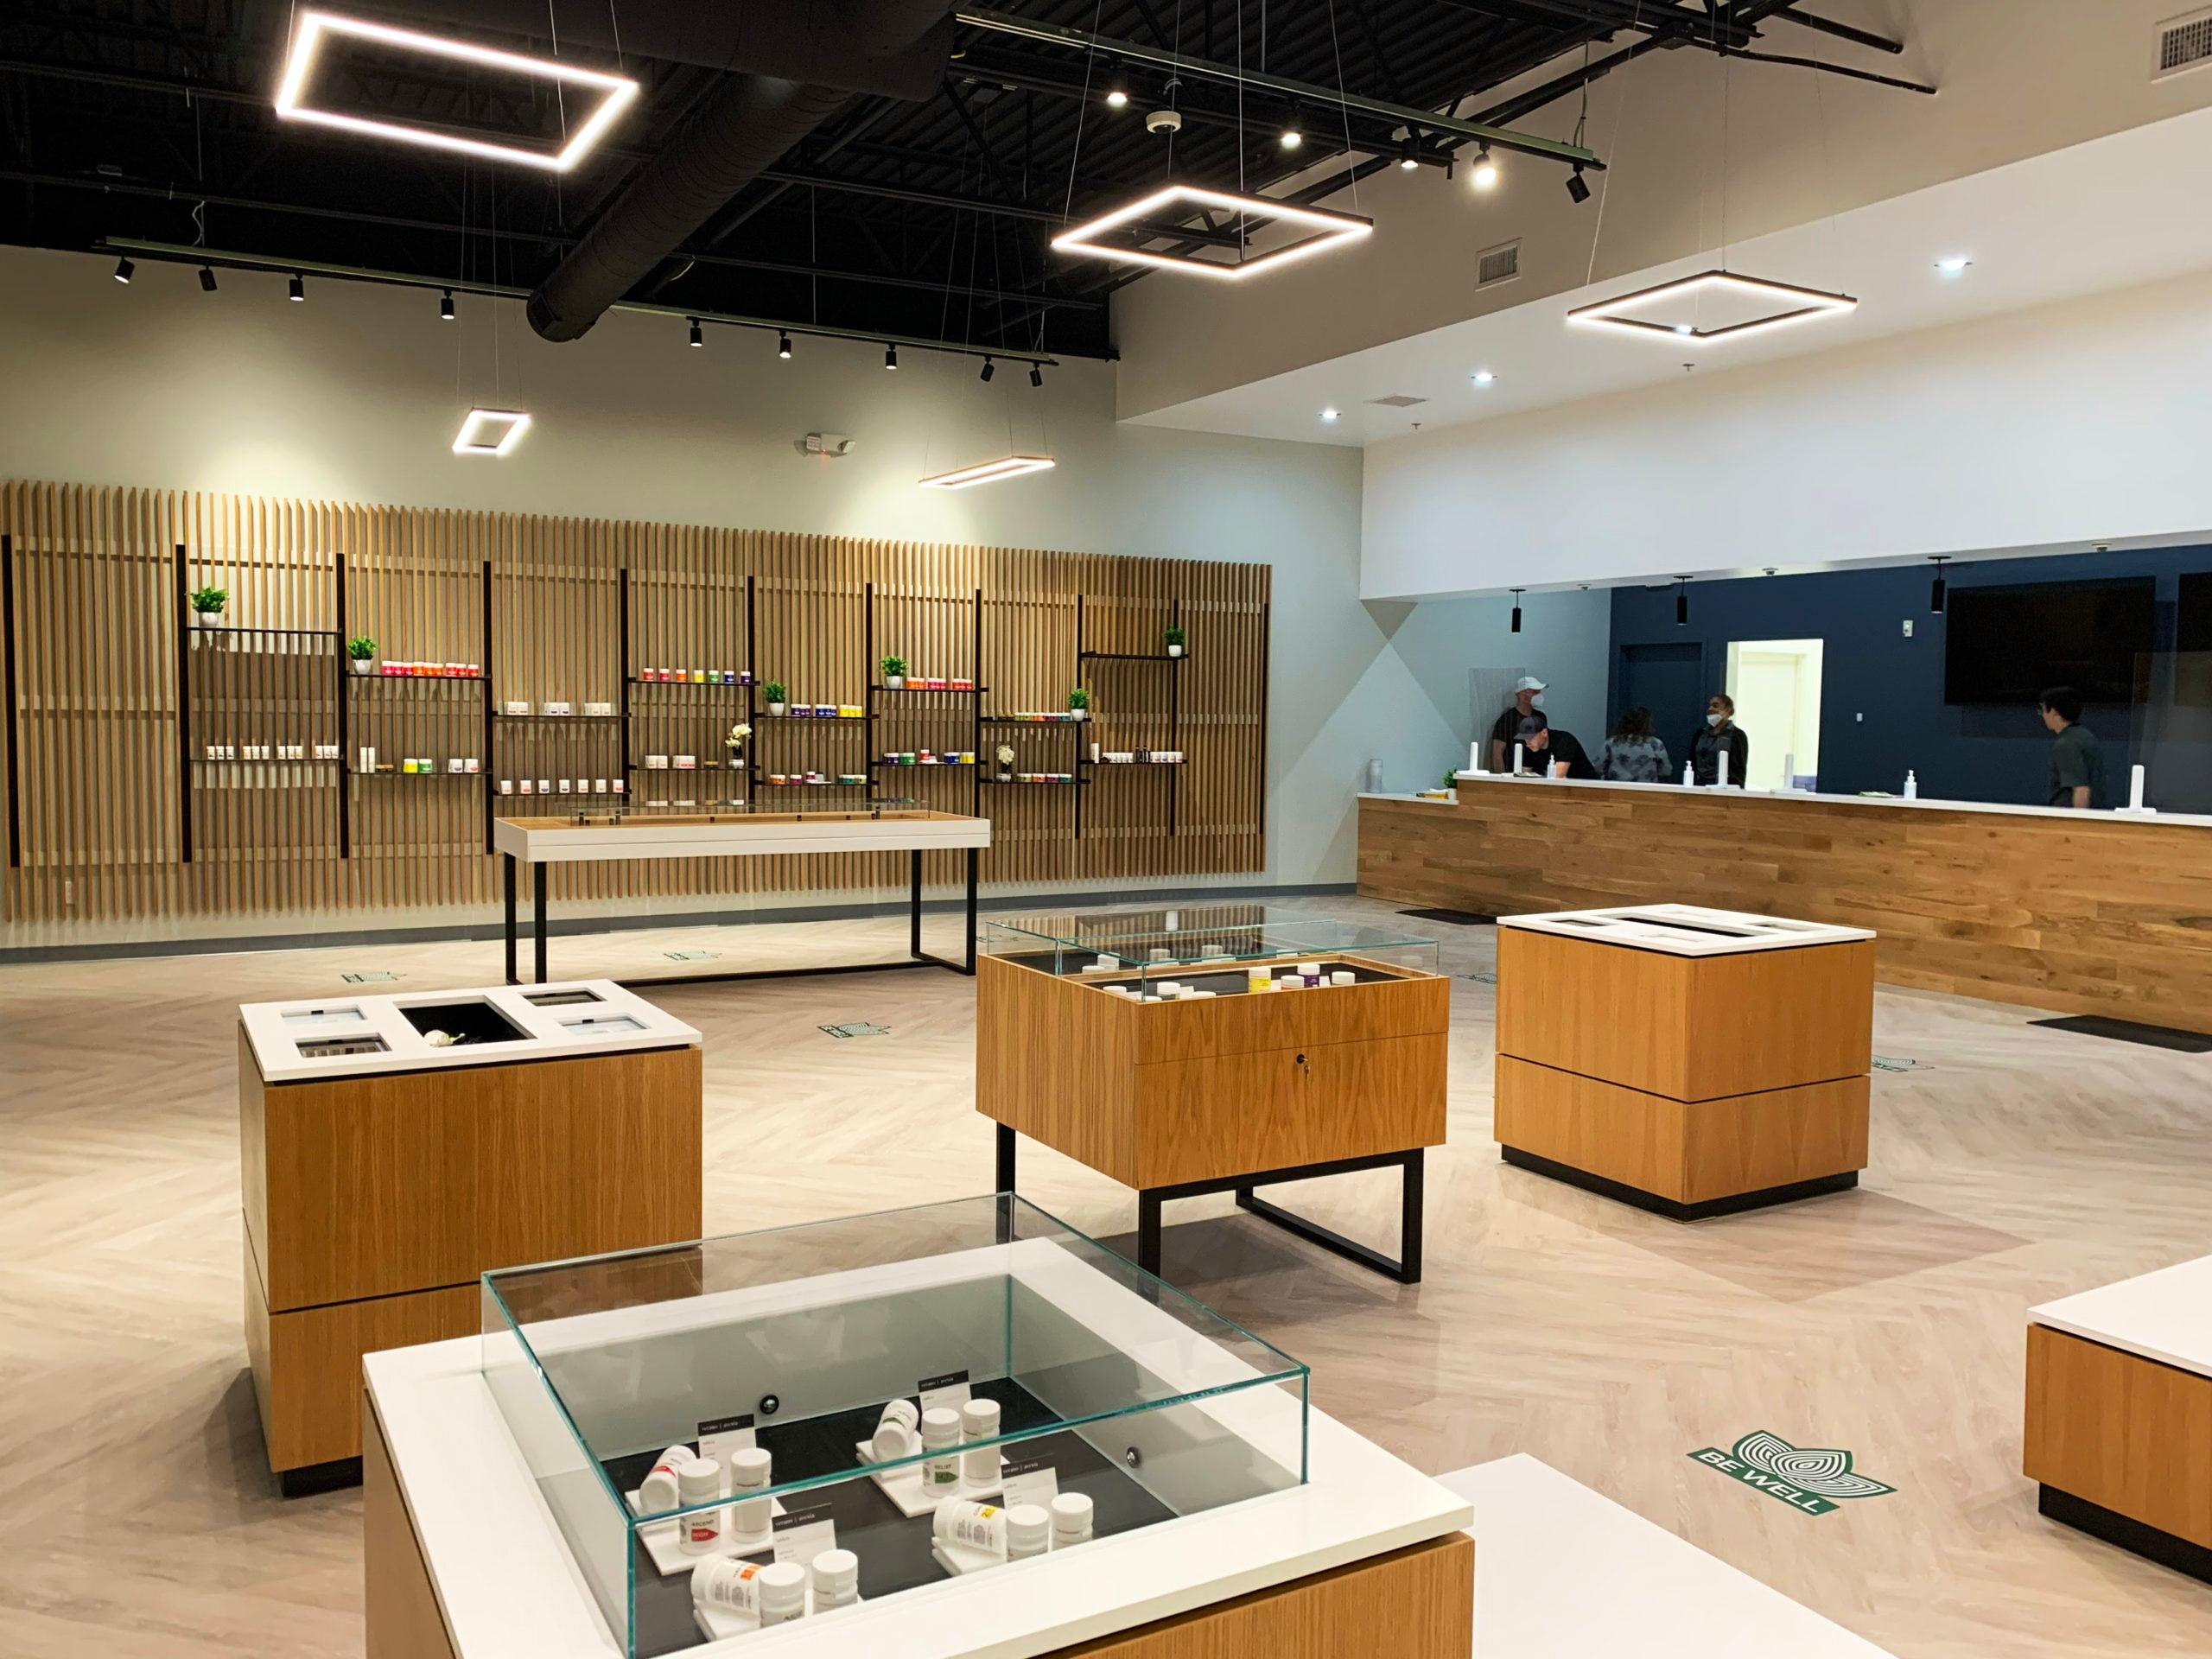 Elizabeth, New Jersey Medical and Recreational Cannabis Dispensary